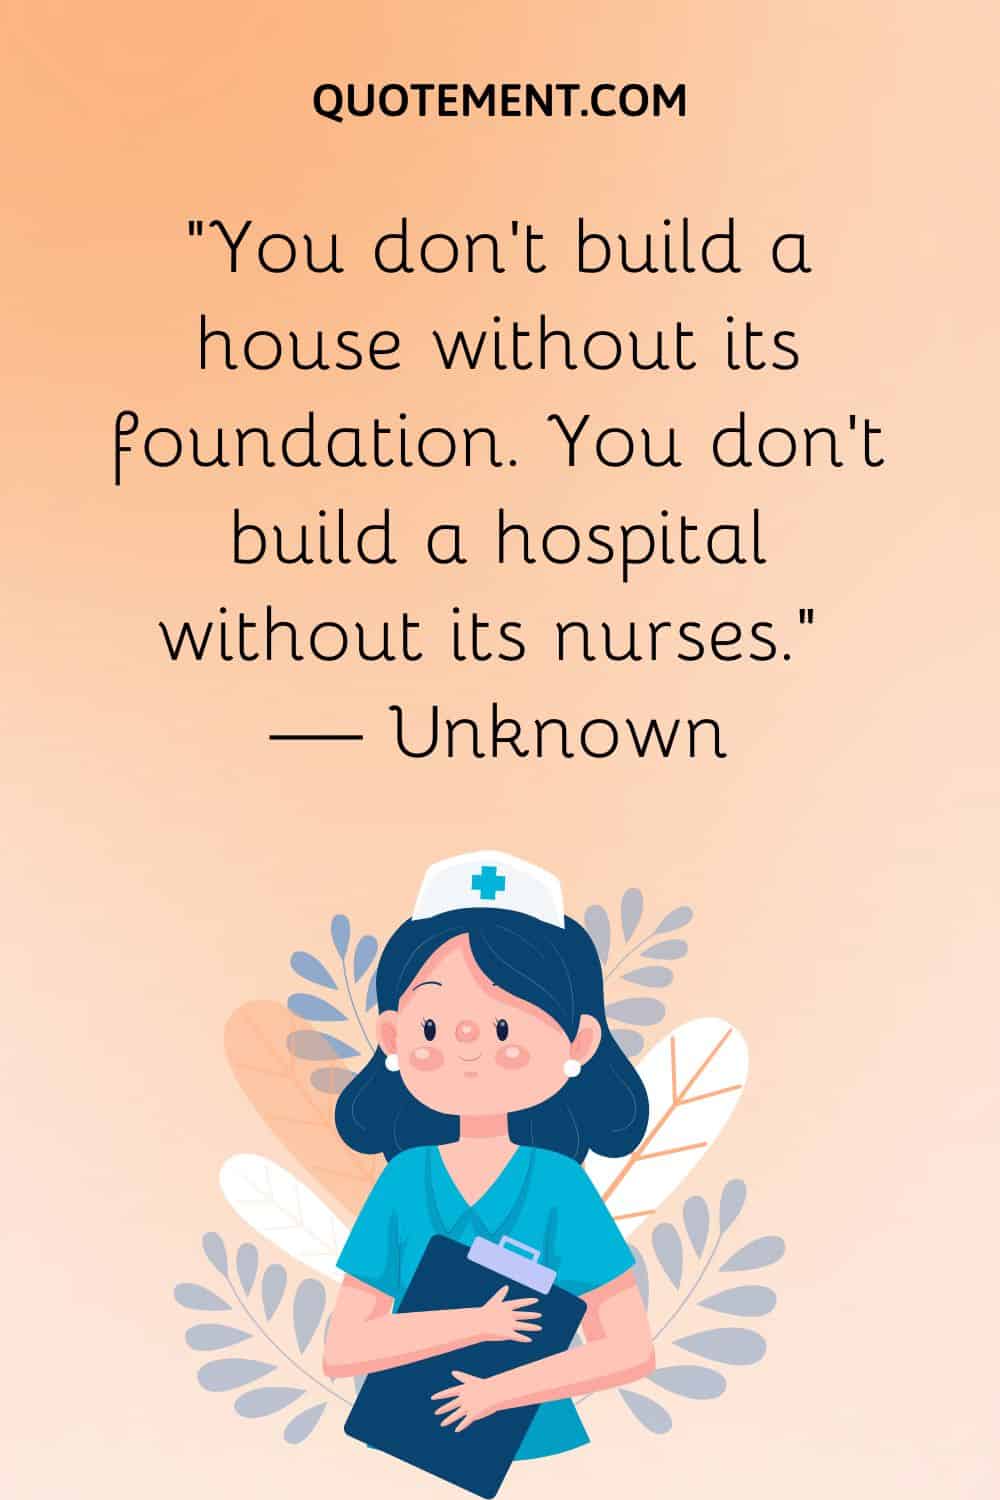 “You don’t build a house without its foundation. You don’t build a hospital without its nurses.” — Unknown